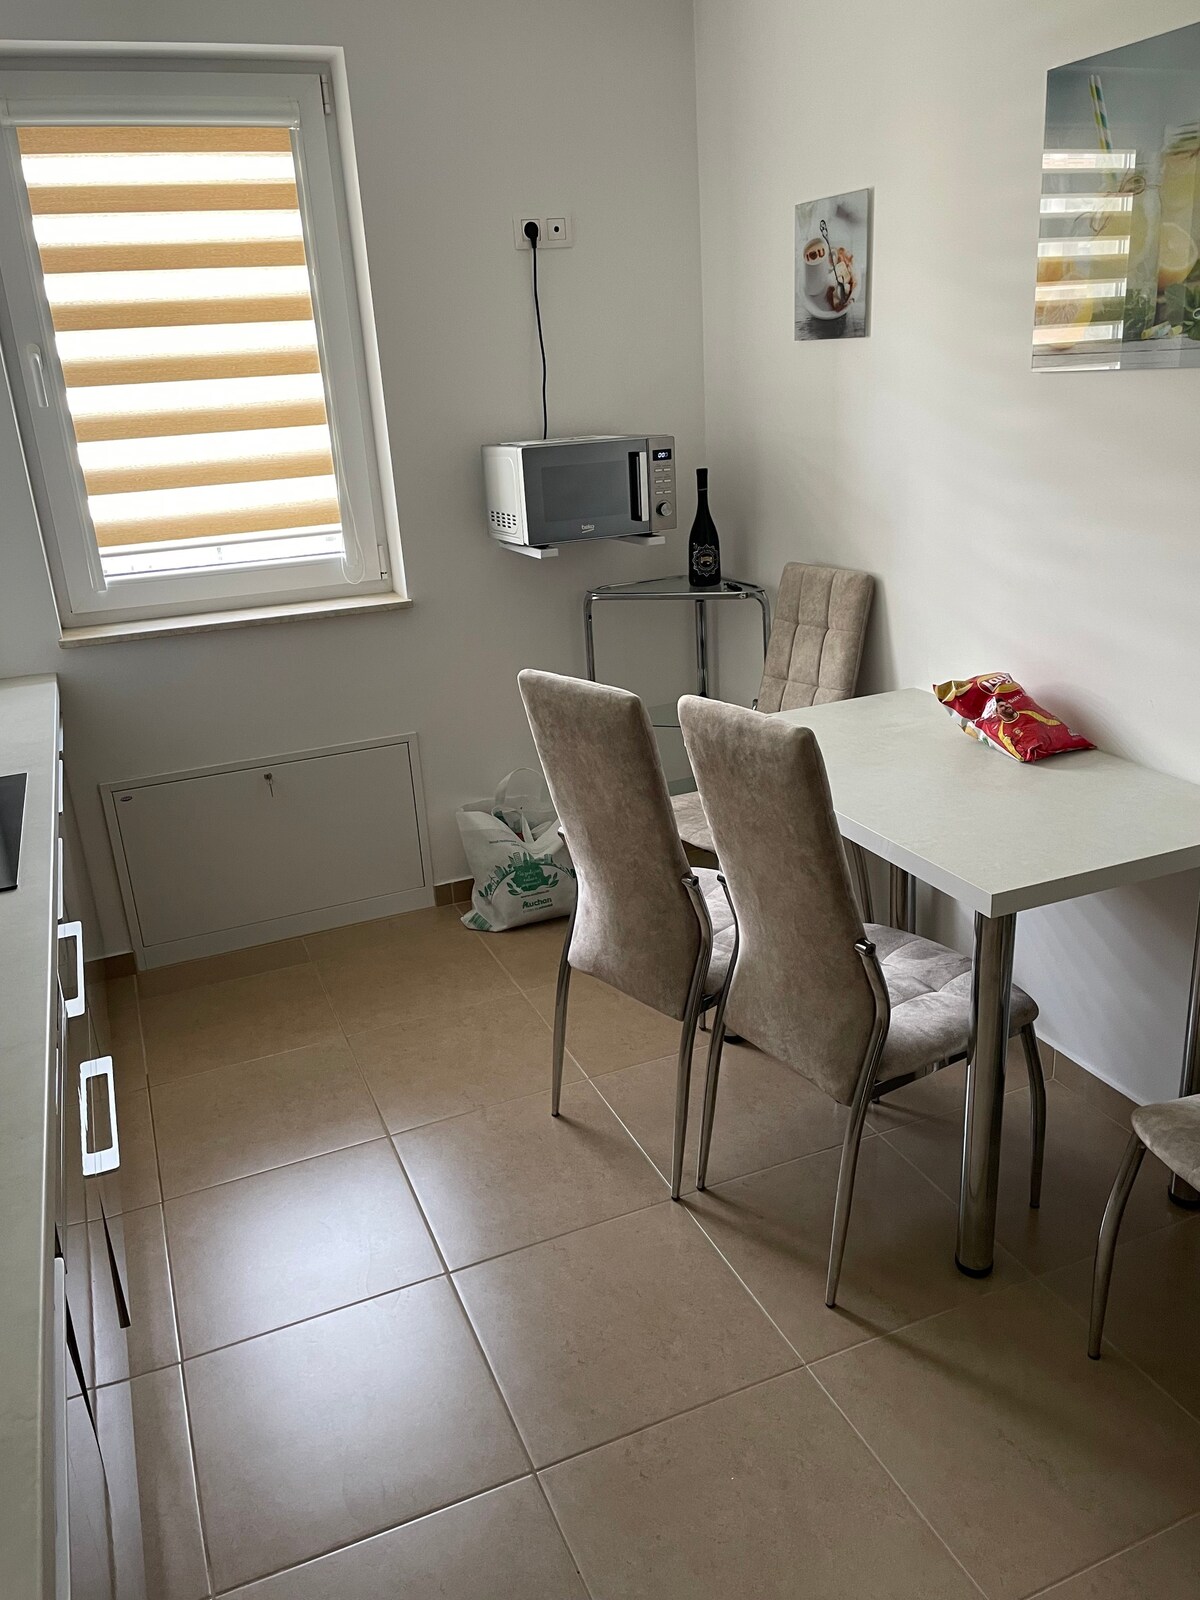 Lovely apartment in Coresii